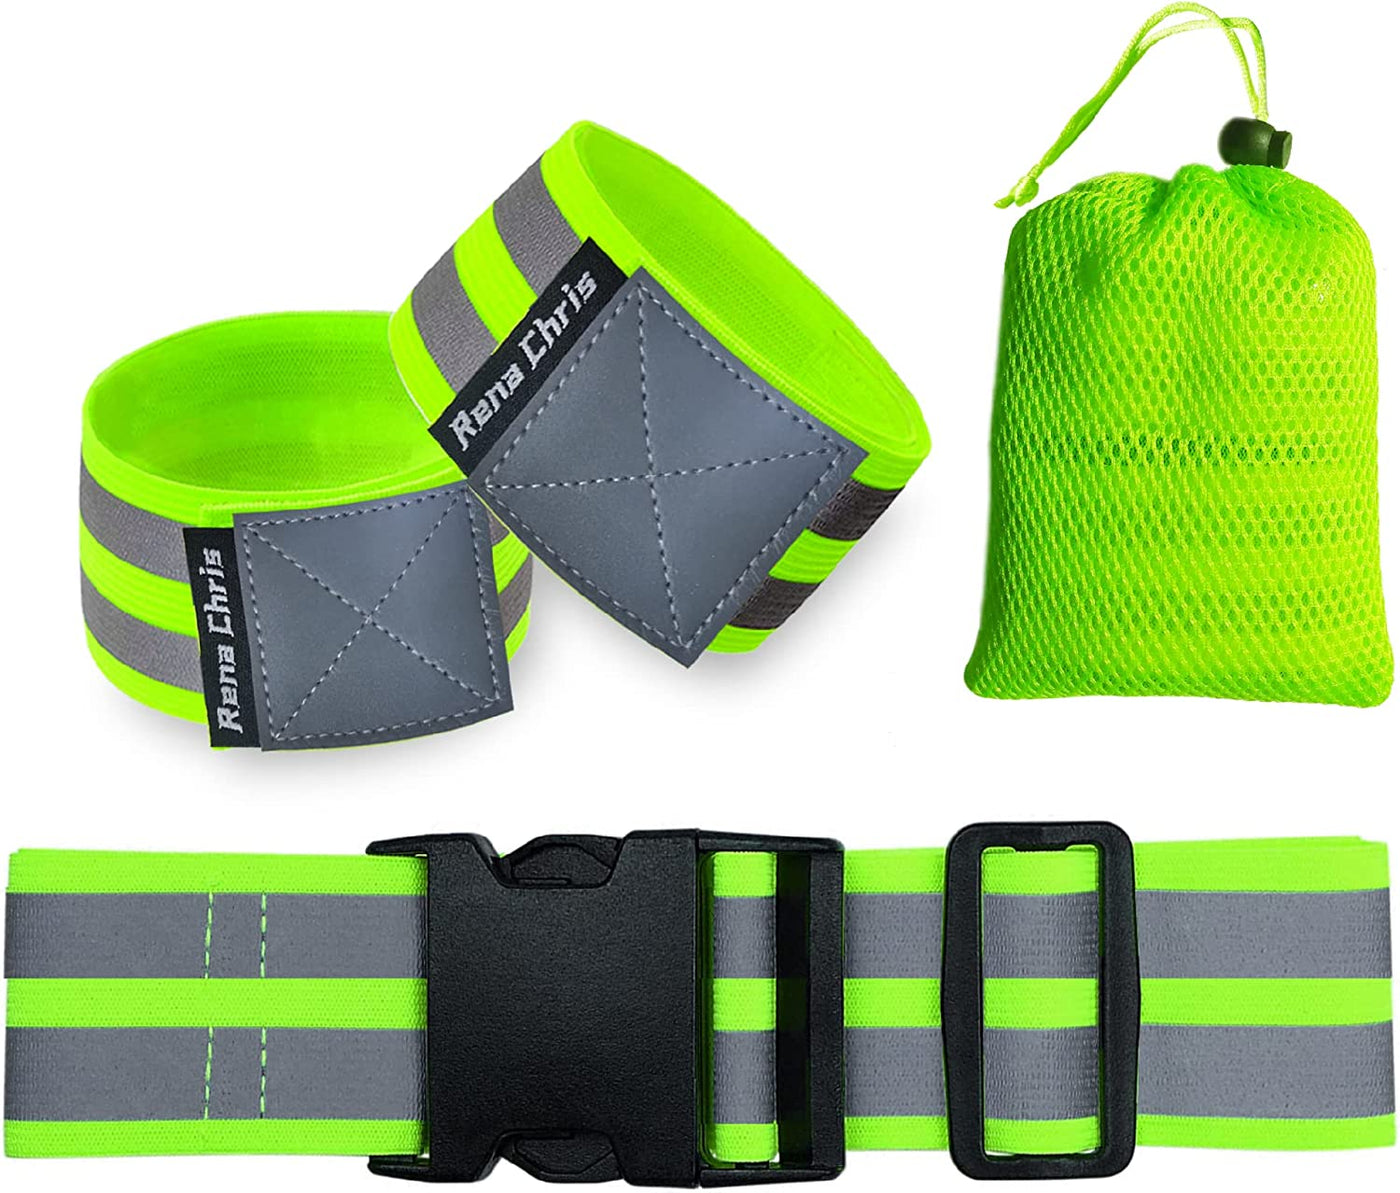 Reflective Running Gear, 3Pcs Reflective Gear for Body, Wrist, Leg, Adjustable Shoulder Strap with Carabiner, Safety Reflector Tape Straps, Large Reflective Surface Area, Suitable for Night Running